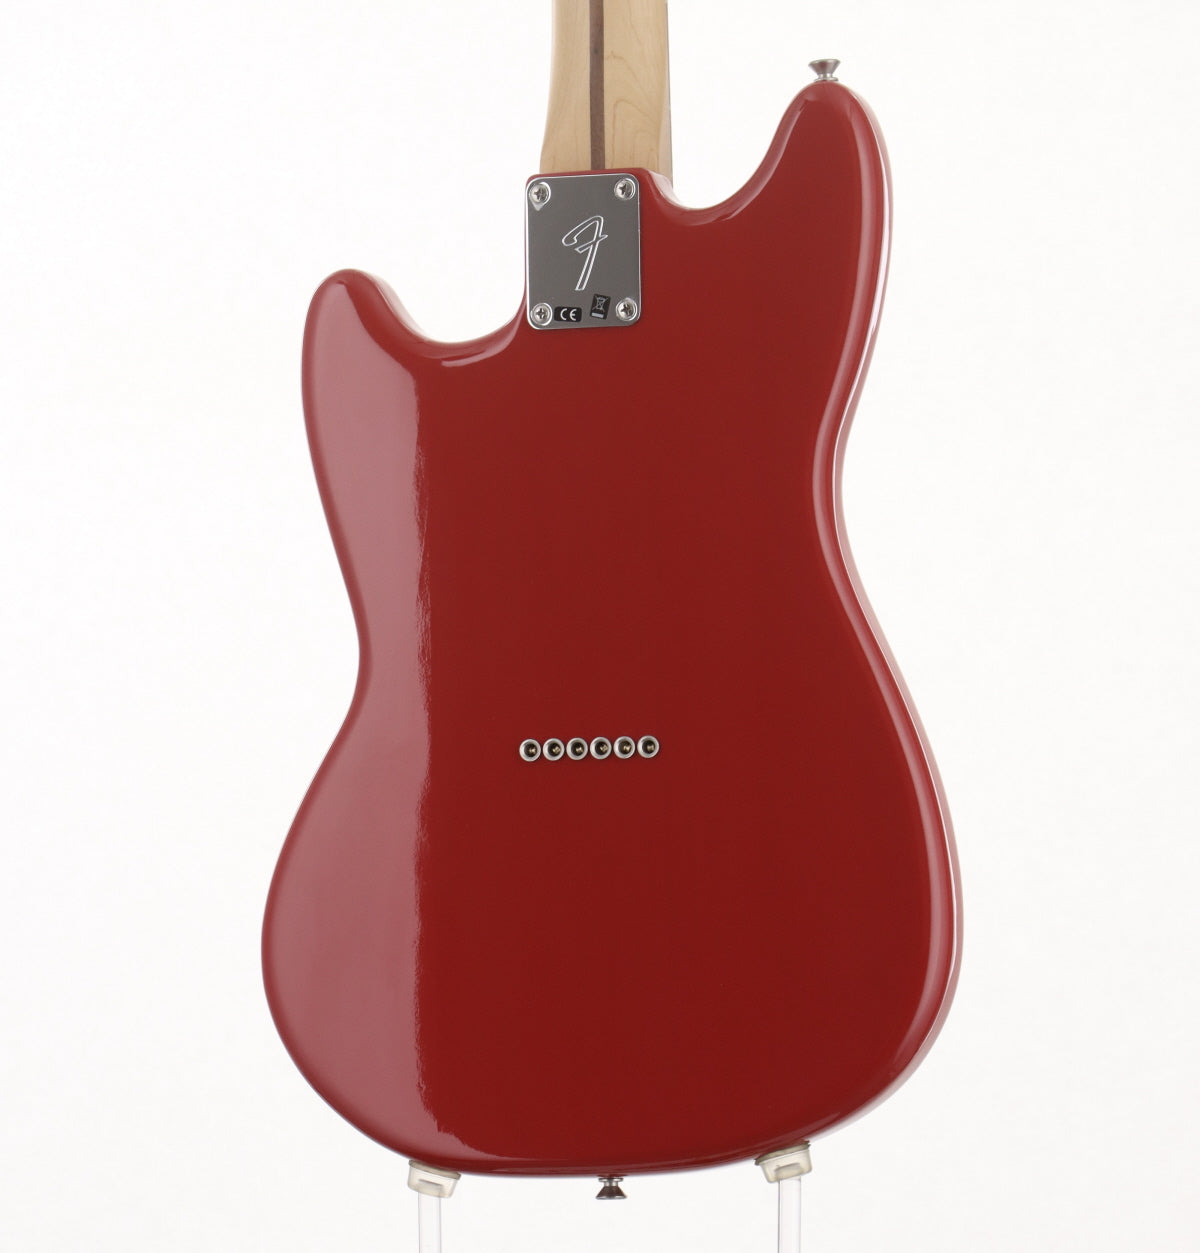 [SN MX8199010] USED FENDER MEXICO / Player Mustang 90 Pau Ferro Fingerboard Torino Red [03]